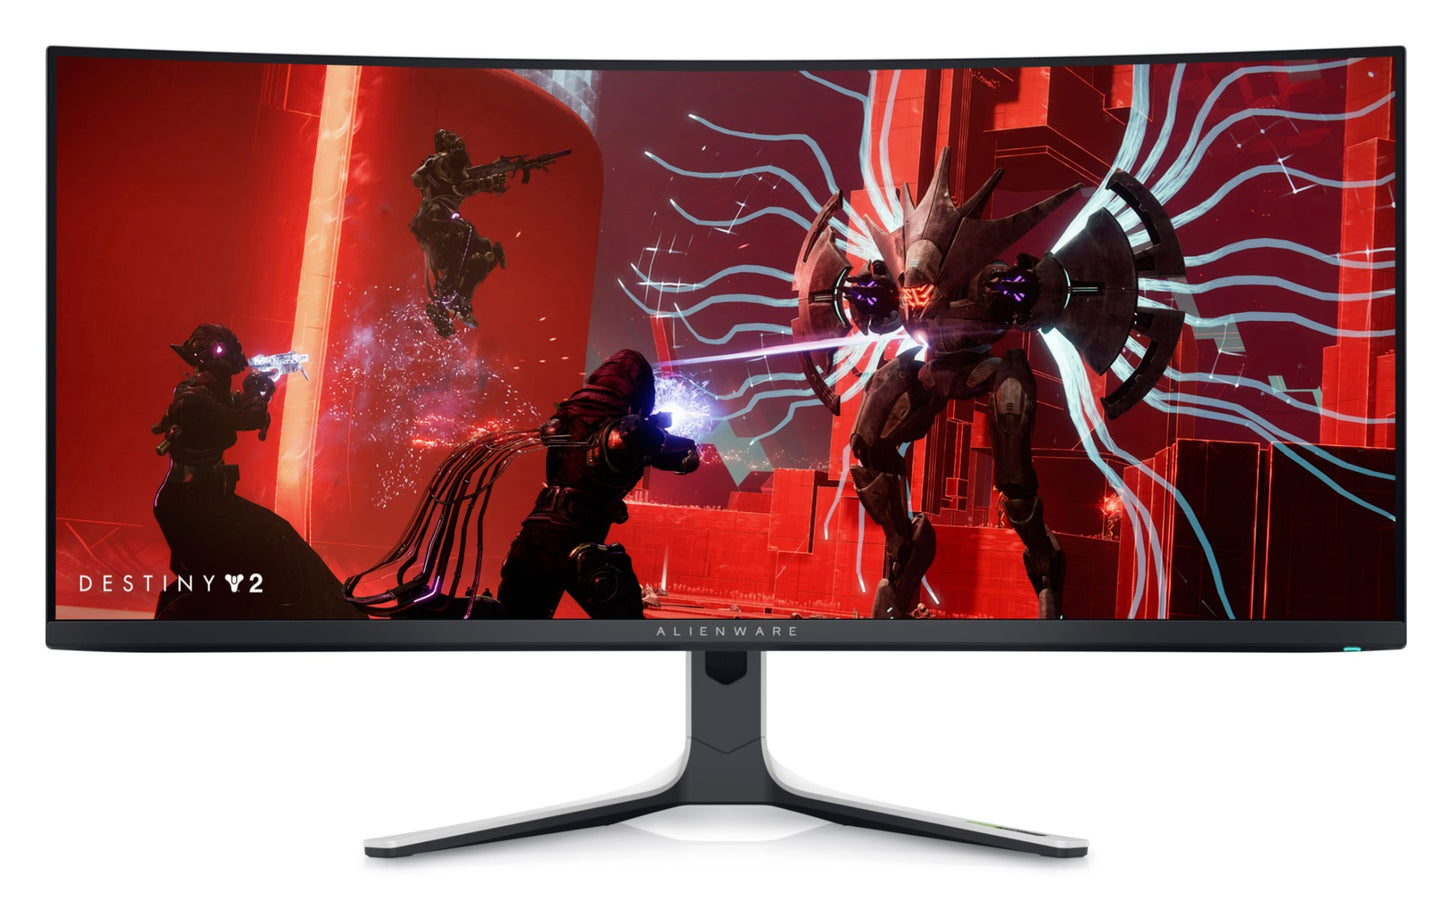 Front 2 of Dell AW3423DW - Alienware Curved 34 inch Gaming monitor with OLED screen and Quantum Dot Technology